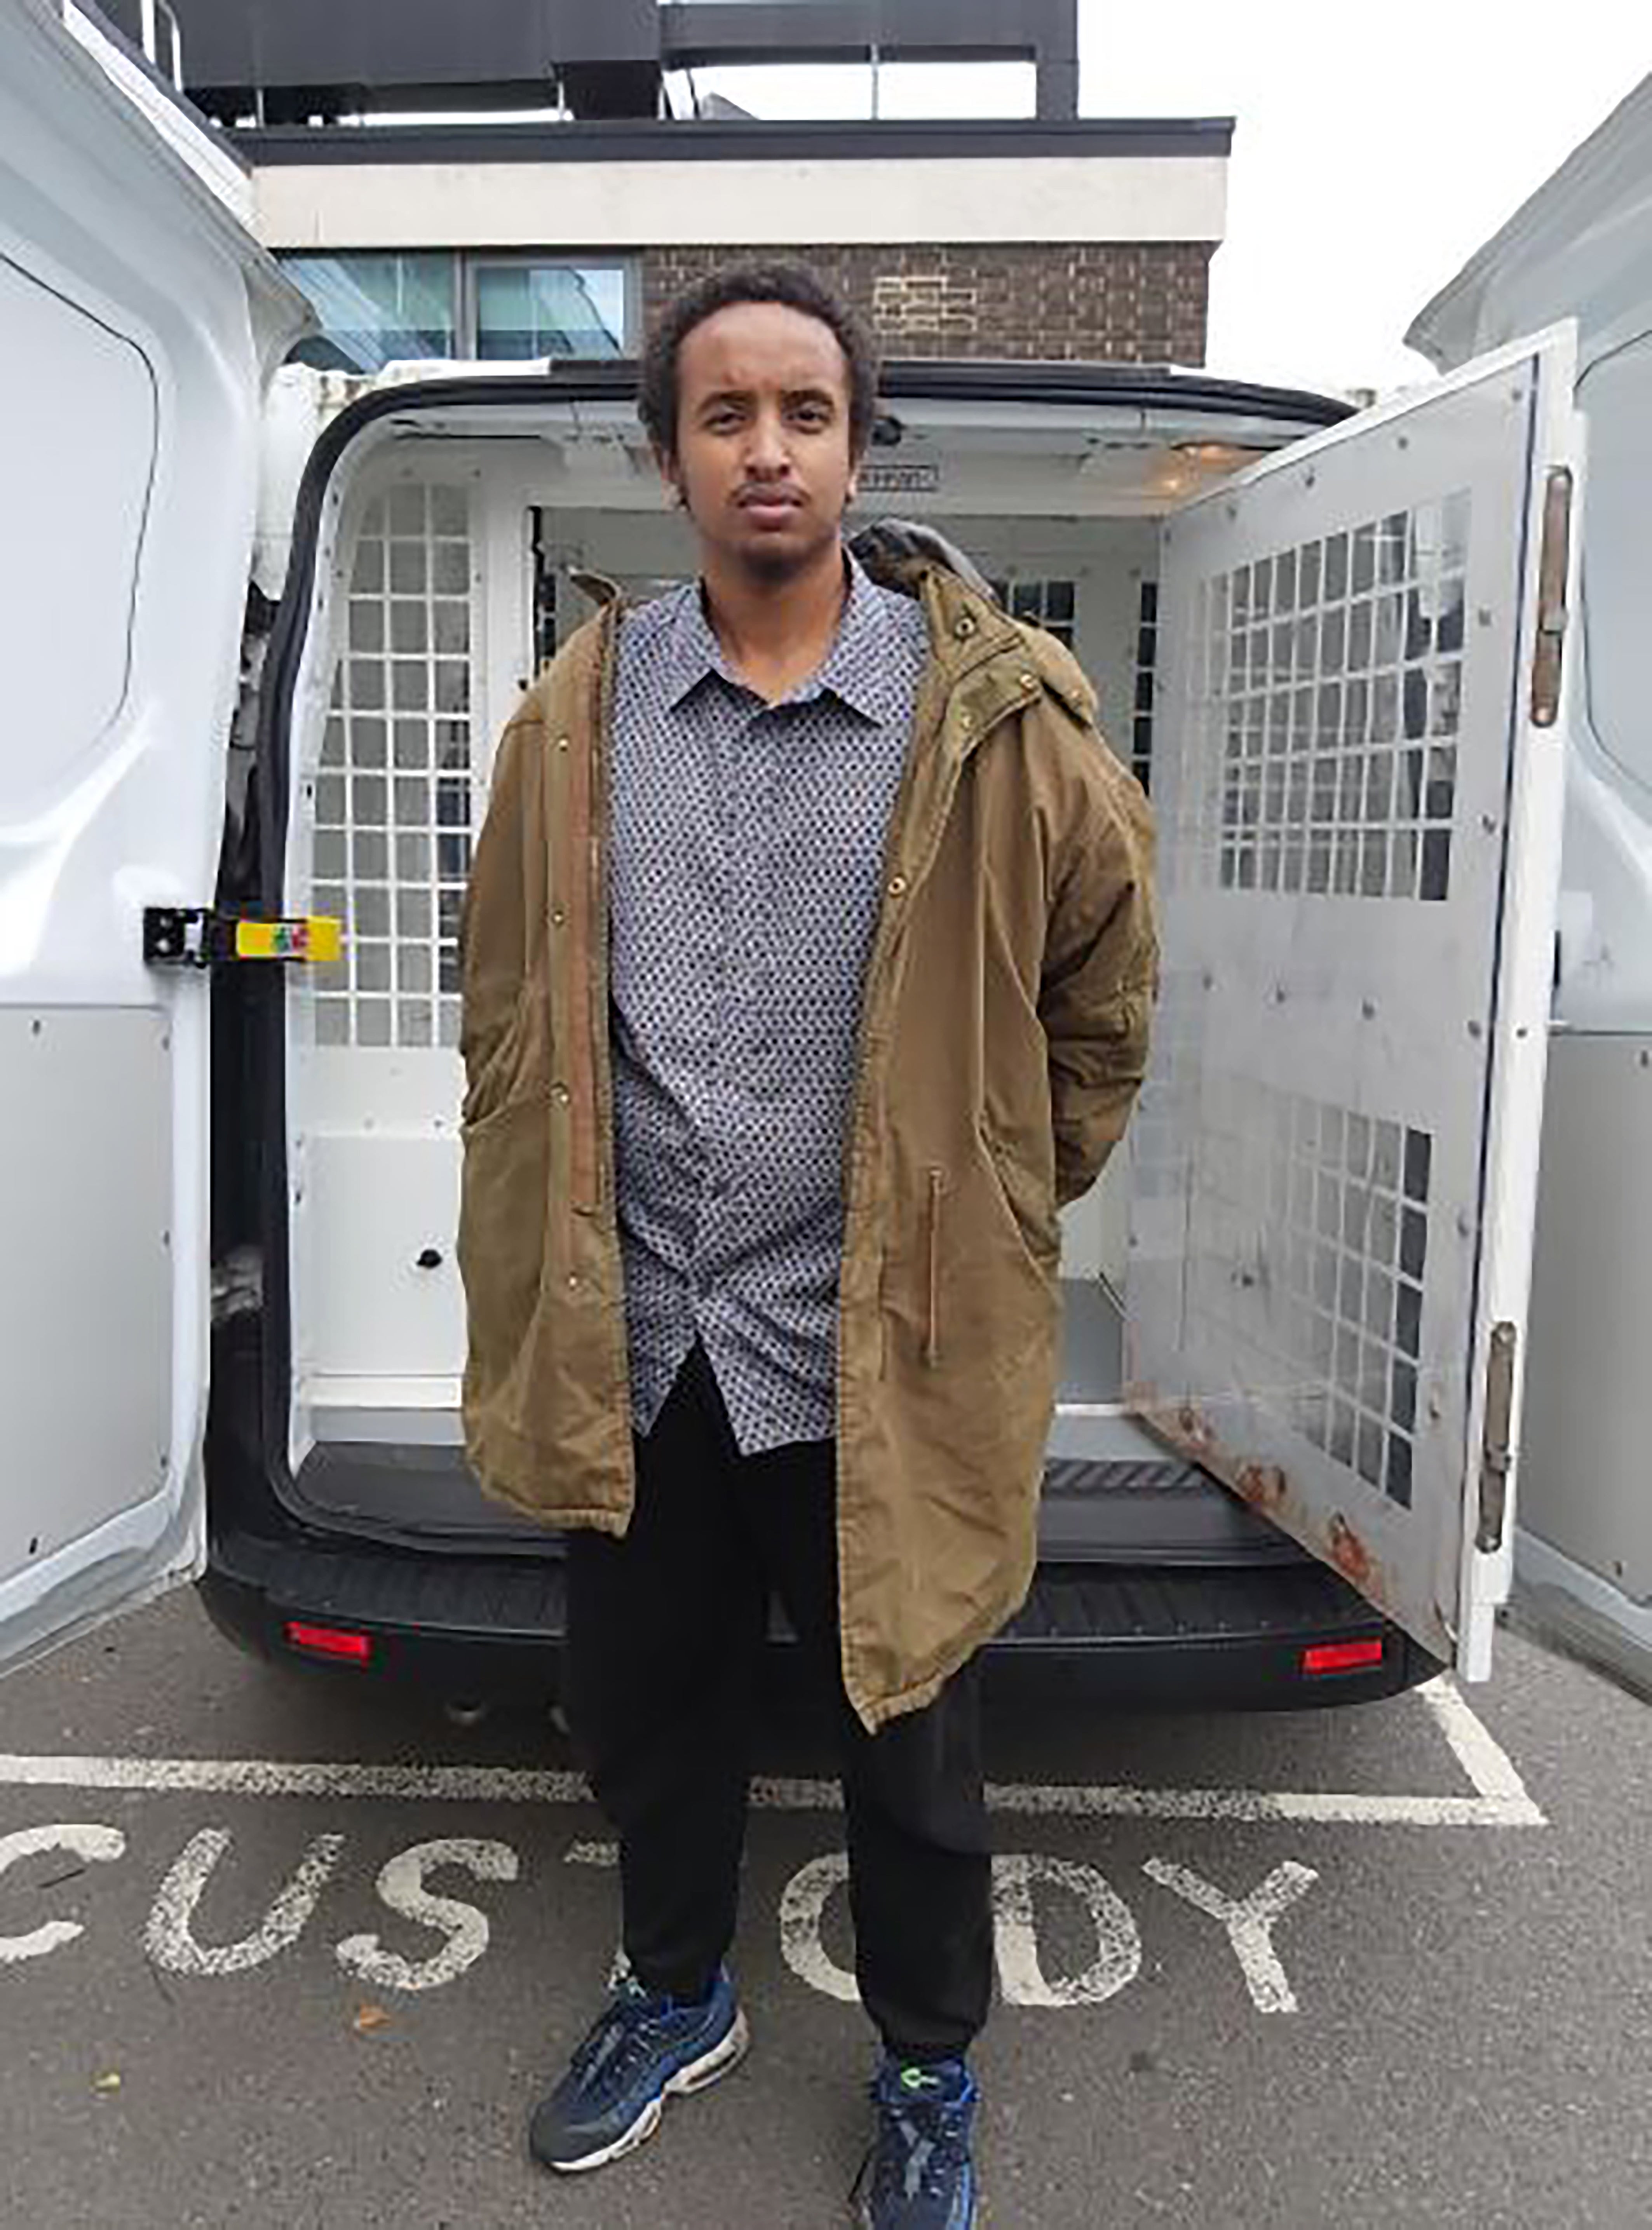 Ali Harbi Ali in custody at Southend police station after being arrested on suspicion of the murder of Sir David Amess (Metropolitan Police/PA)